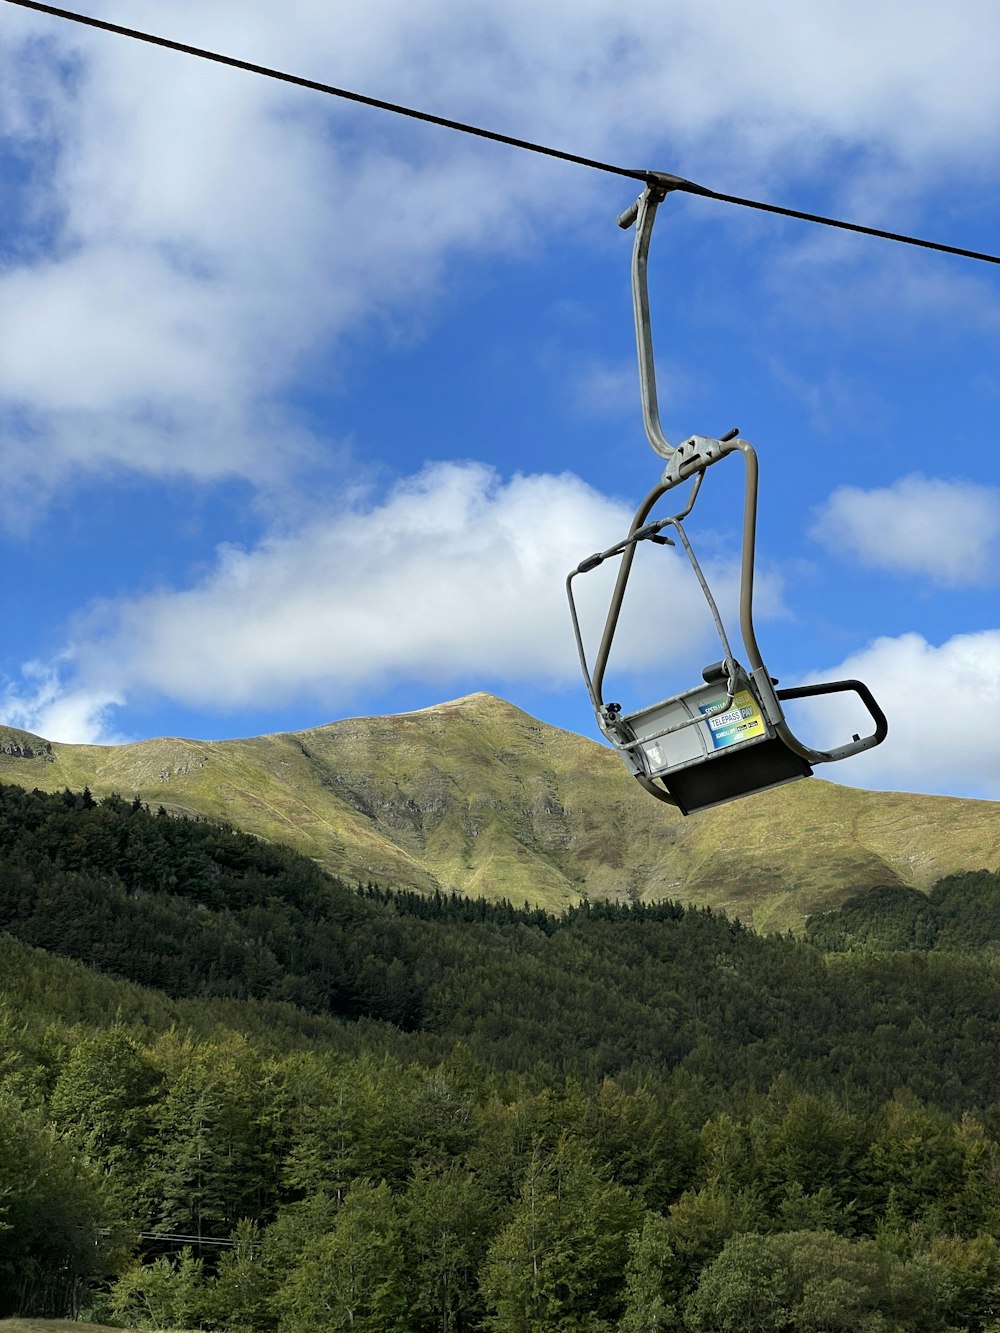 a ski lift going up the side of a mountain